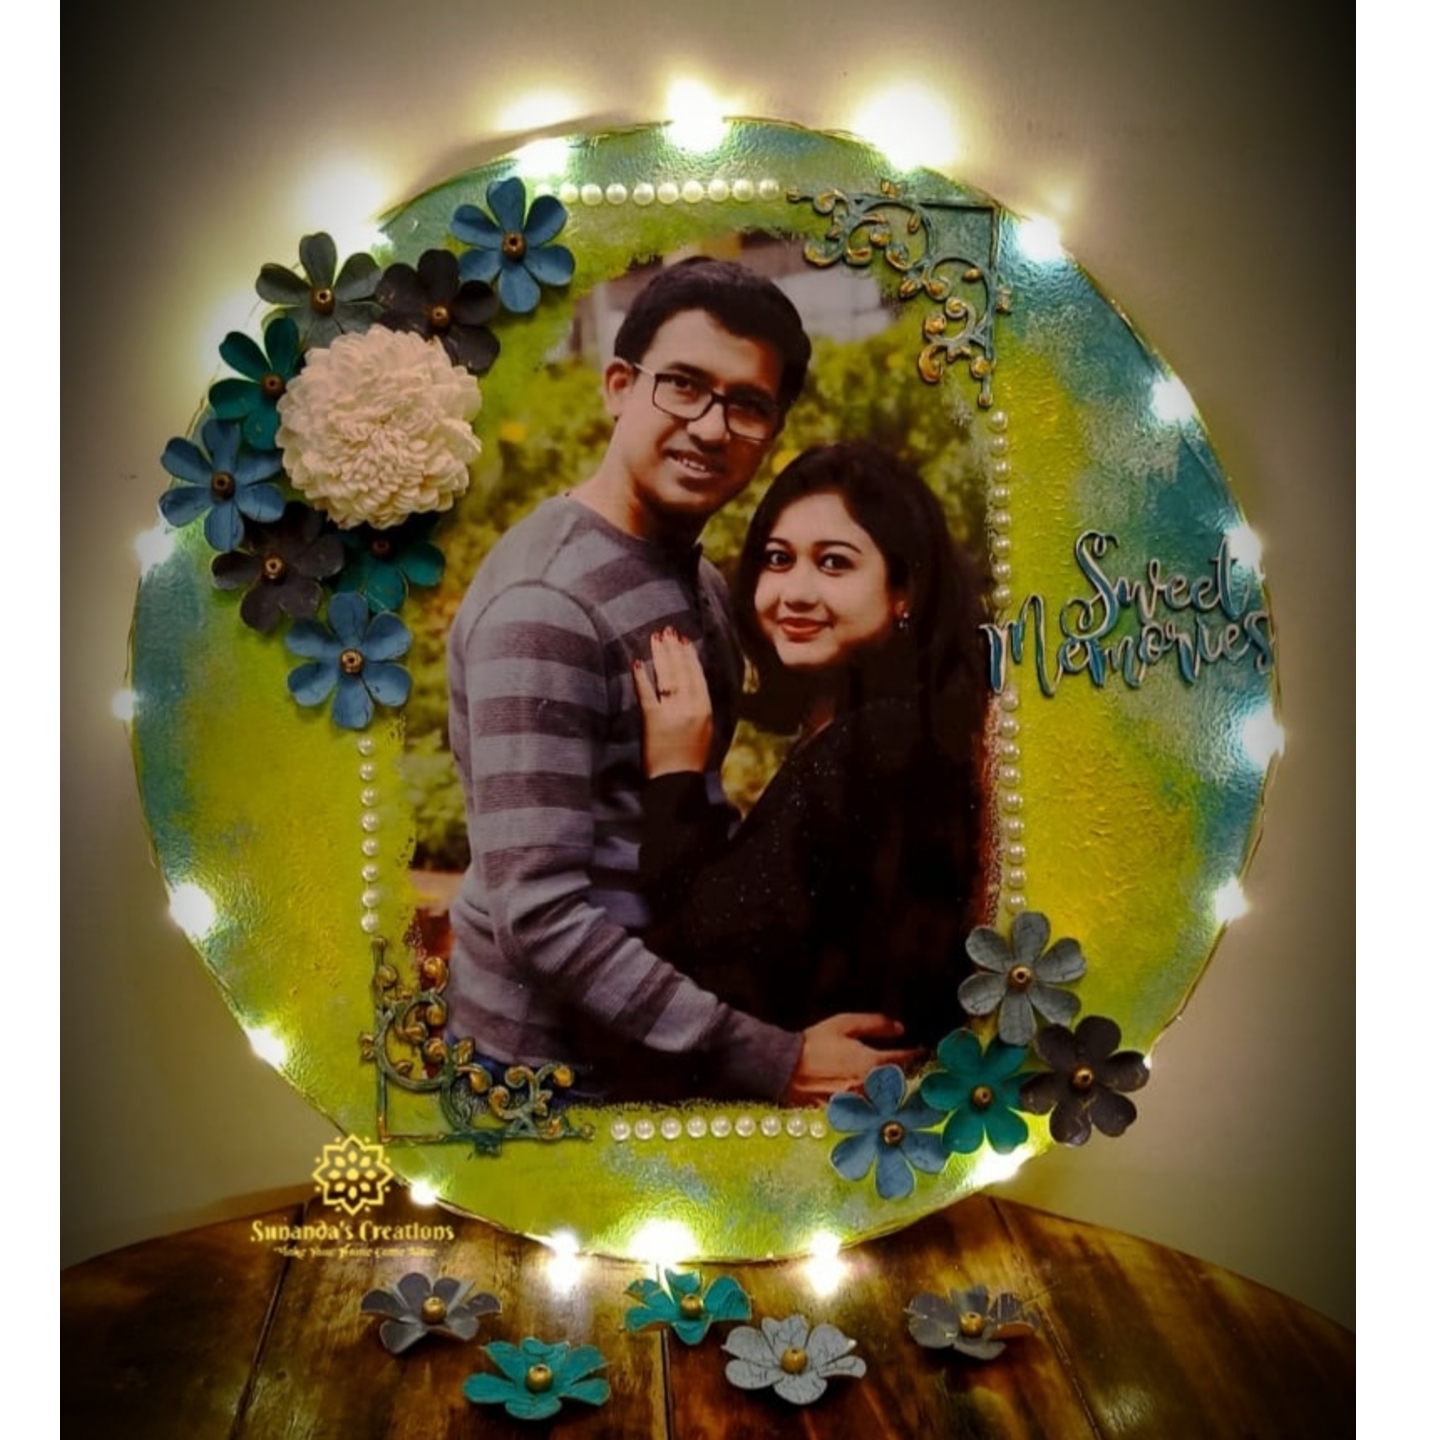 Personalized Photo Plate Mixed media Hand painted Light & wooden stand included